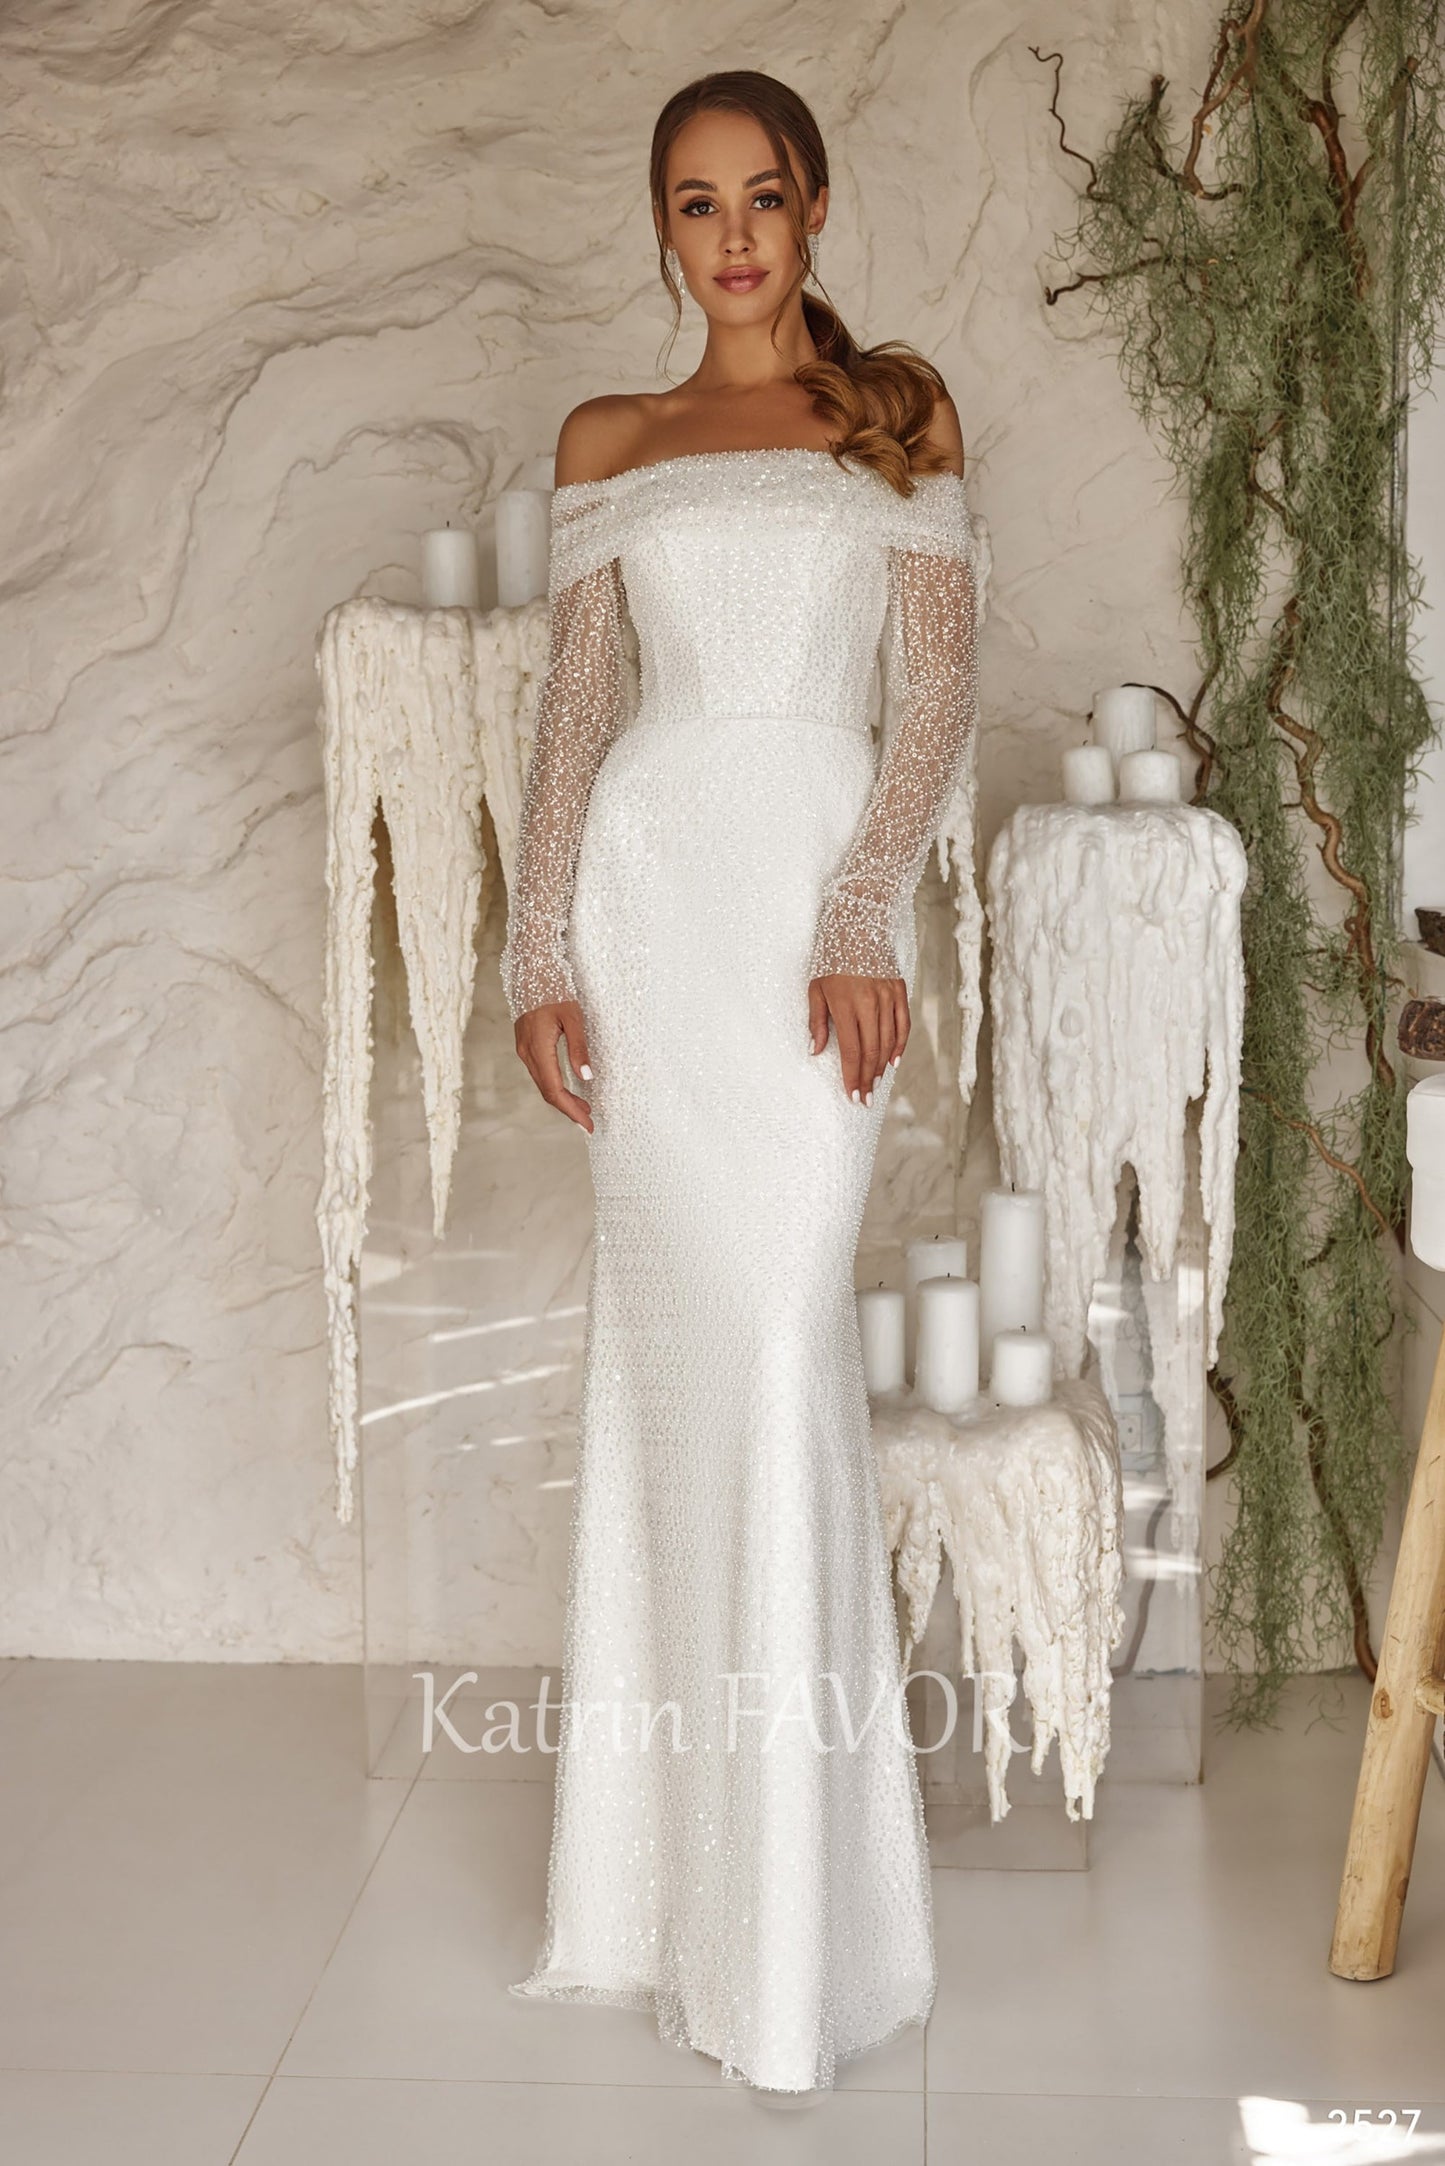 KatrinFAVORboutique-Two piece beaded wedding dress